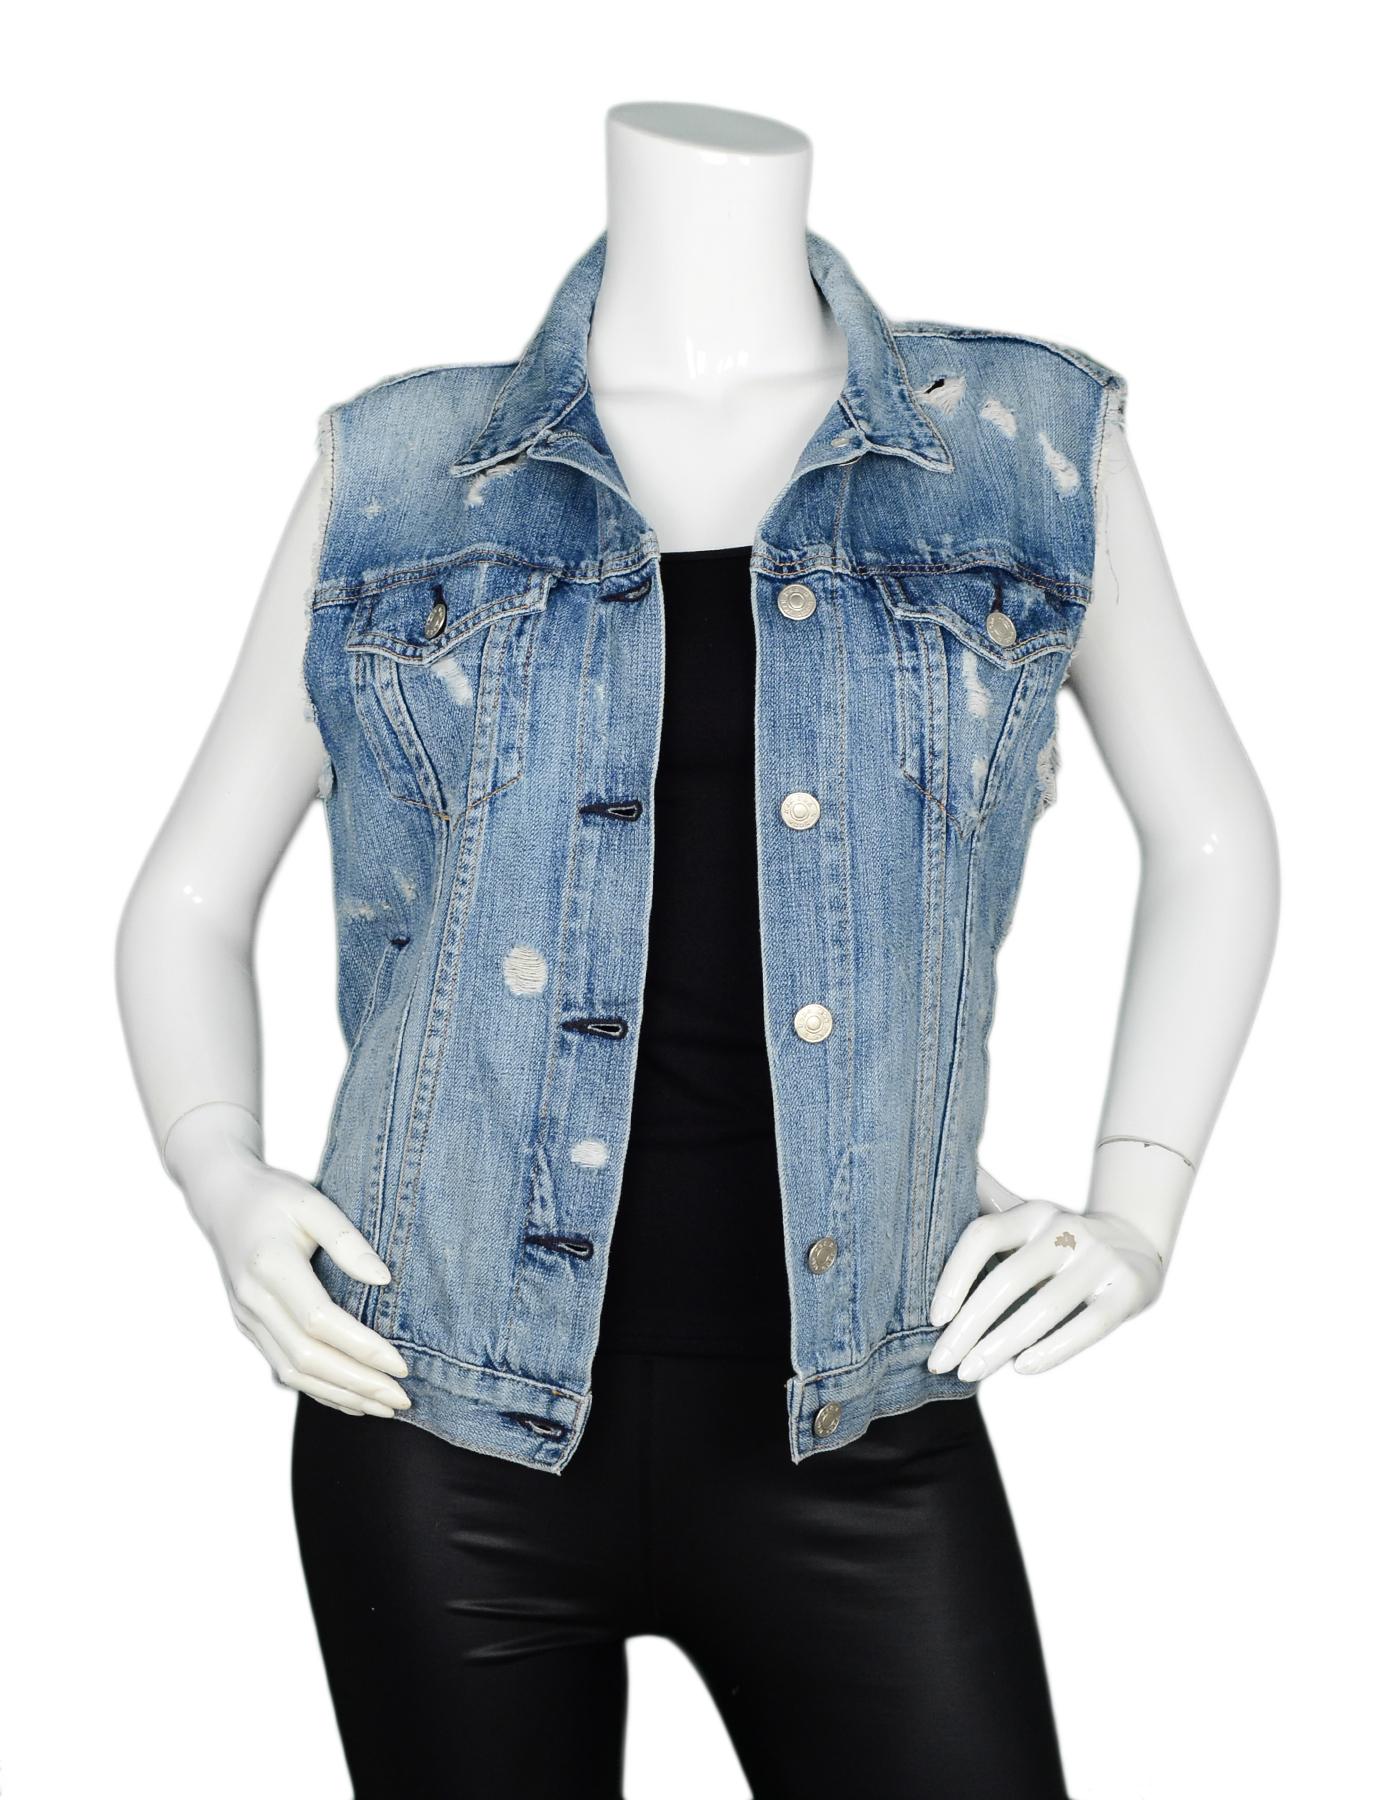 Rag & Bone Distressed Blue Denim Vest NWT Sz L

Made In: USA
Color: Blue
Materials: 100% cotton
Opening/Closure: Button front
Overall Condition: Excellent condition with original tags attached, distressing is intentional. 
Estimated Retail: $220 +